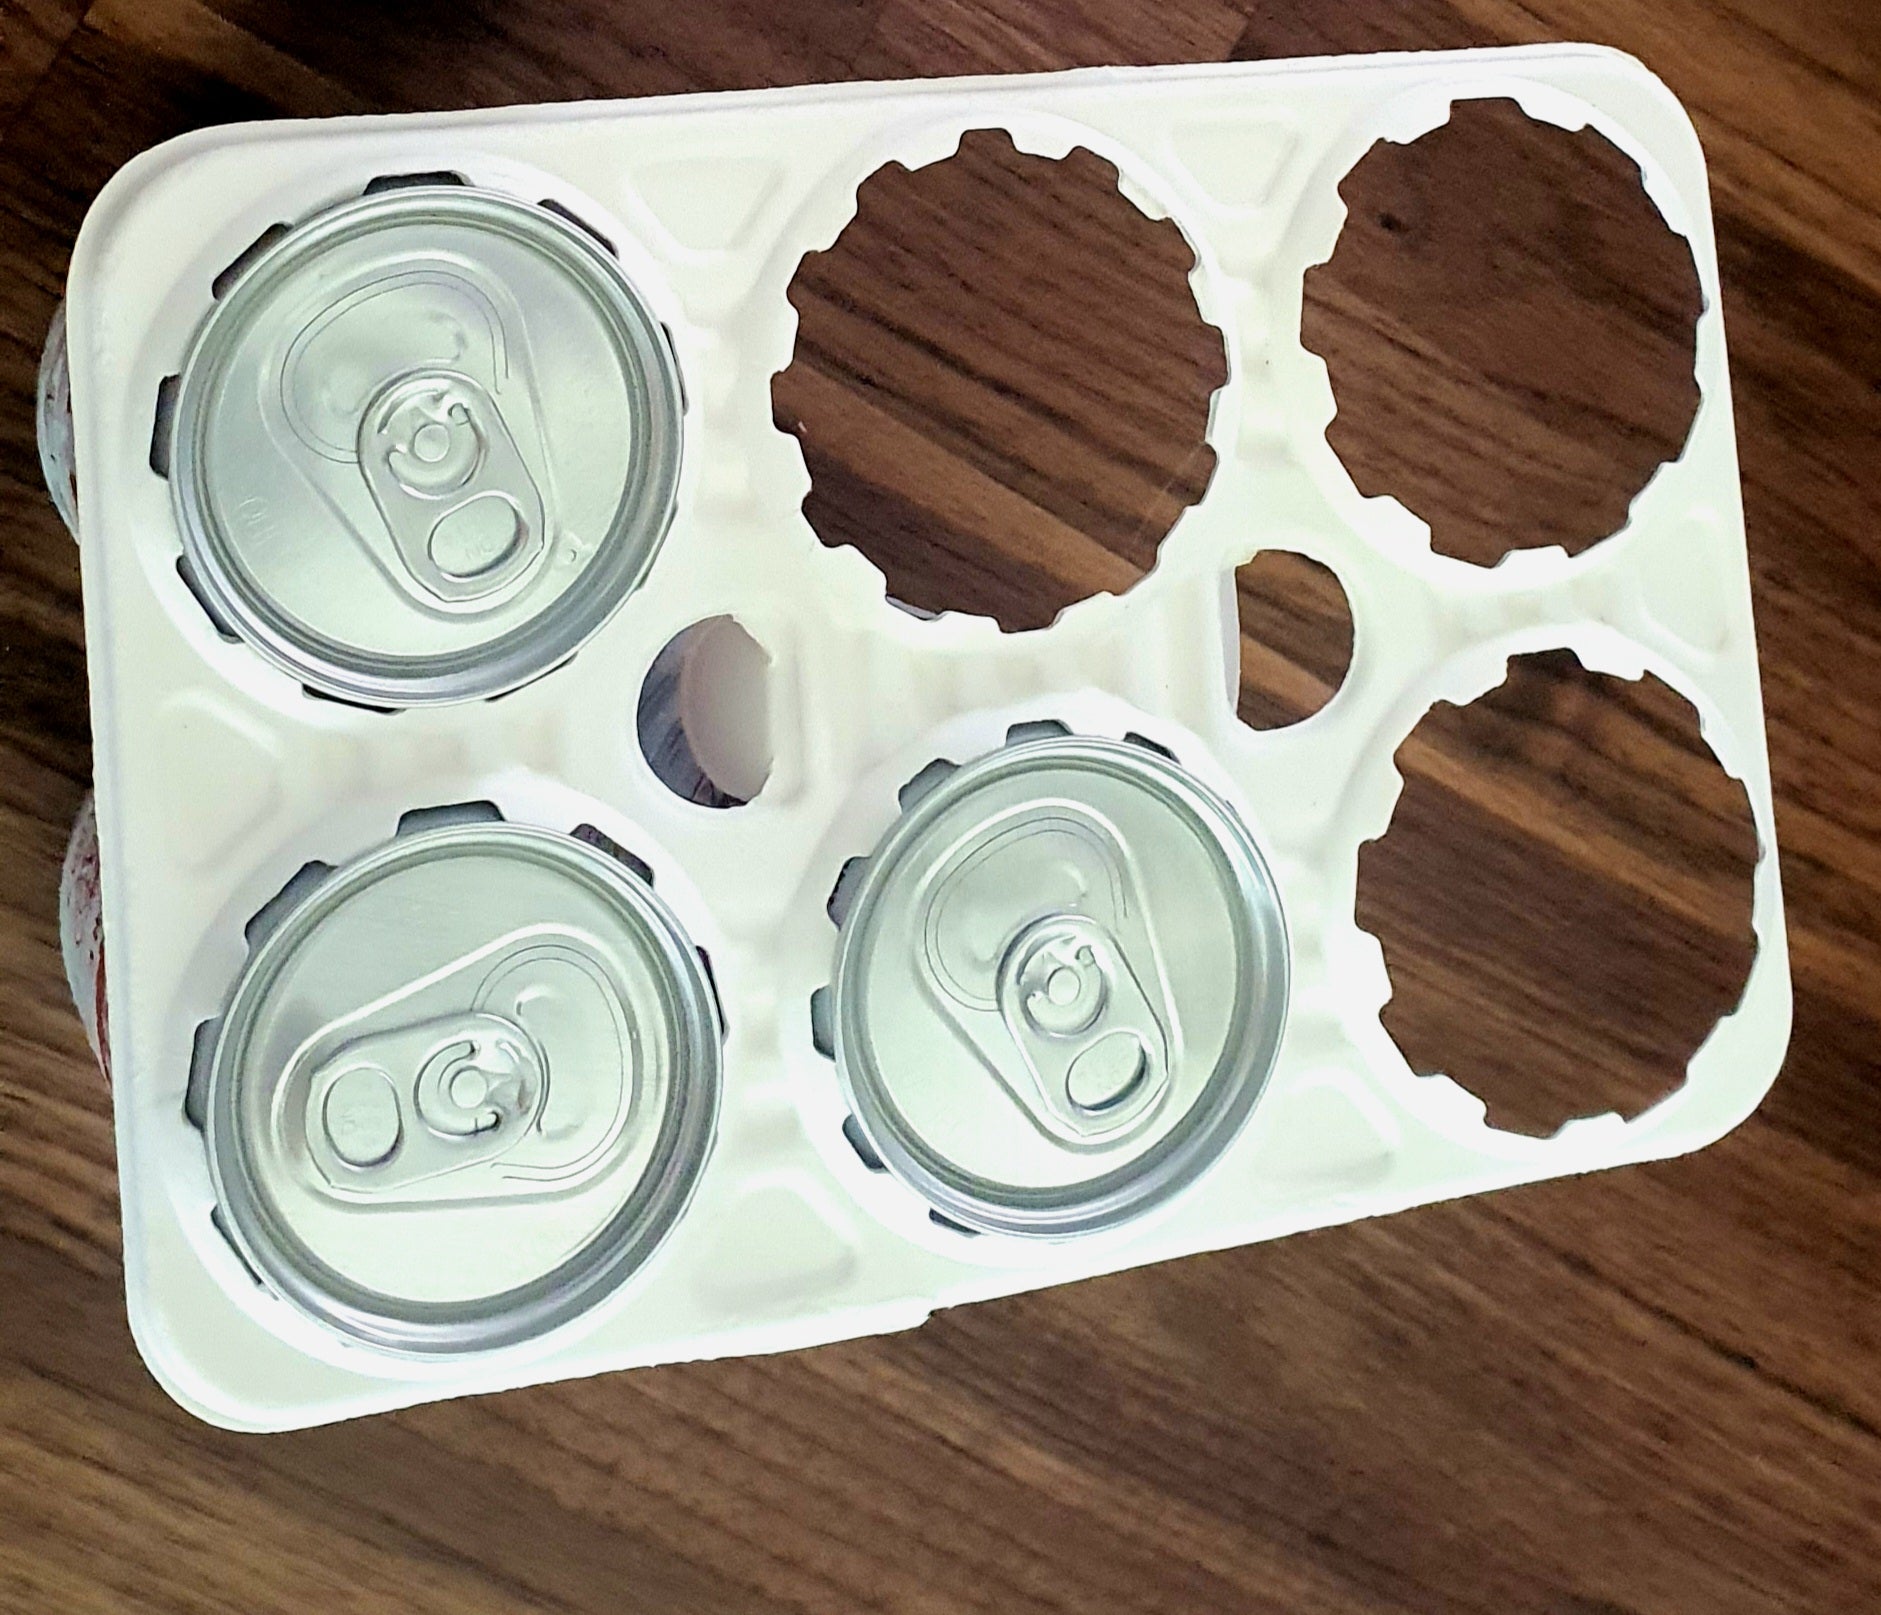 Compostable and Marine Biodegradable Six-Pack Rings - Singular Solutions  inc.